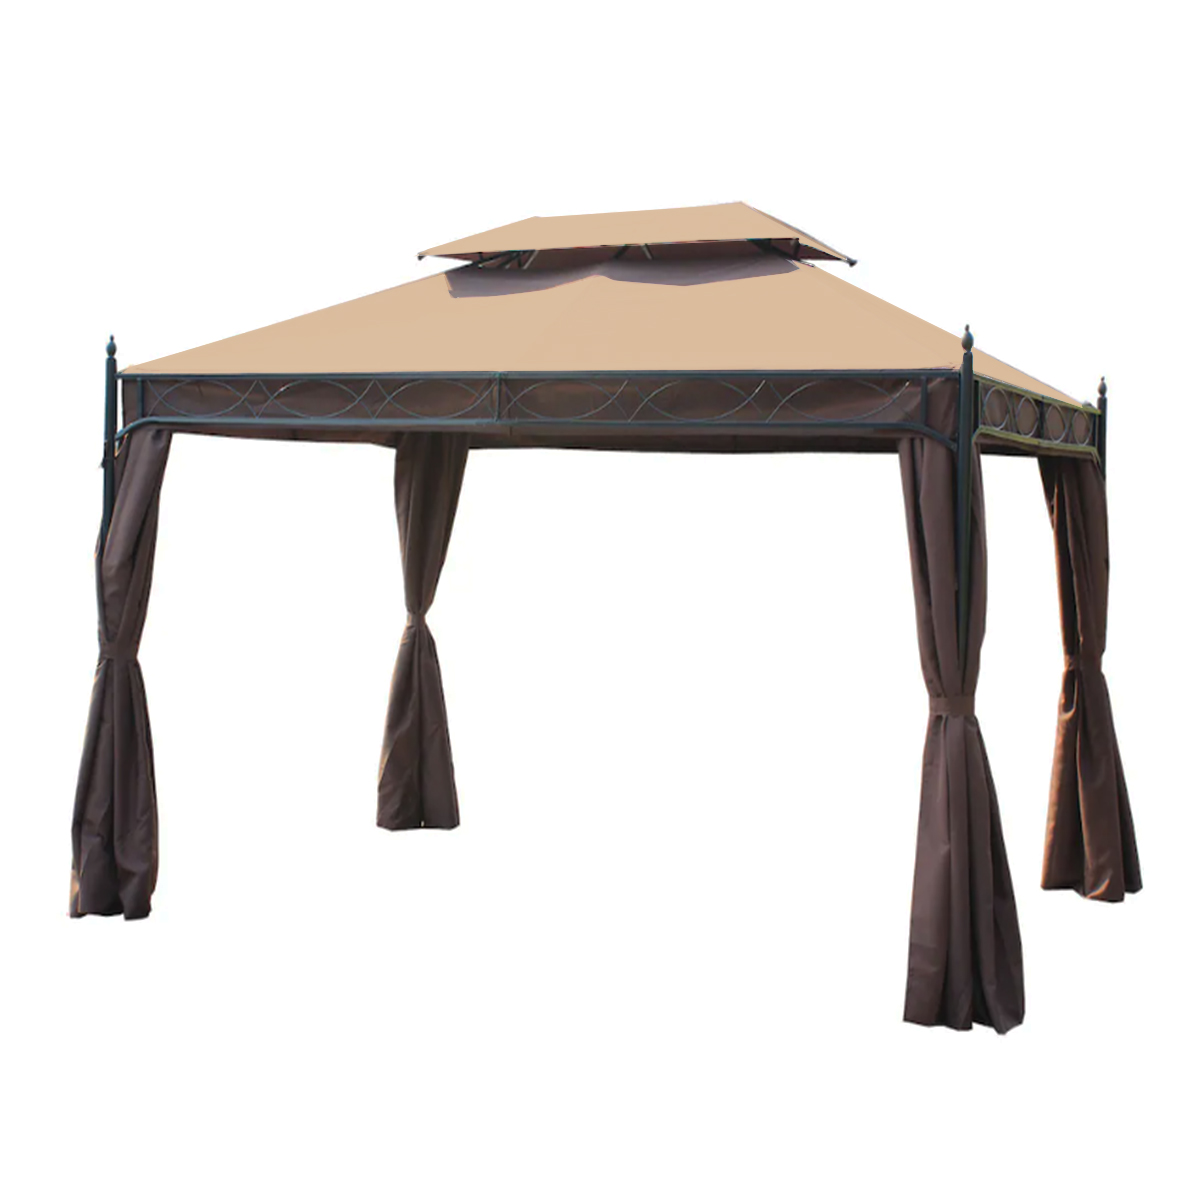 Replacement Canopy for Outsunny 10x13 Garden Gazebo - RipLock 35